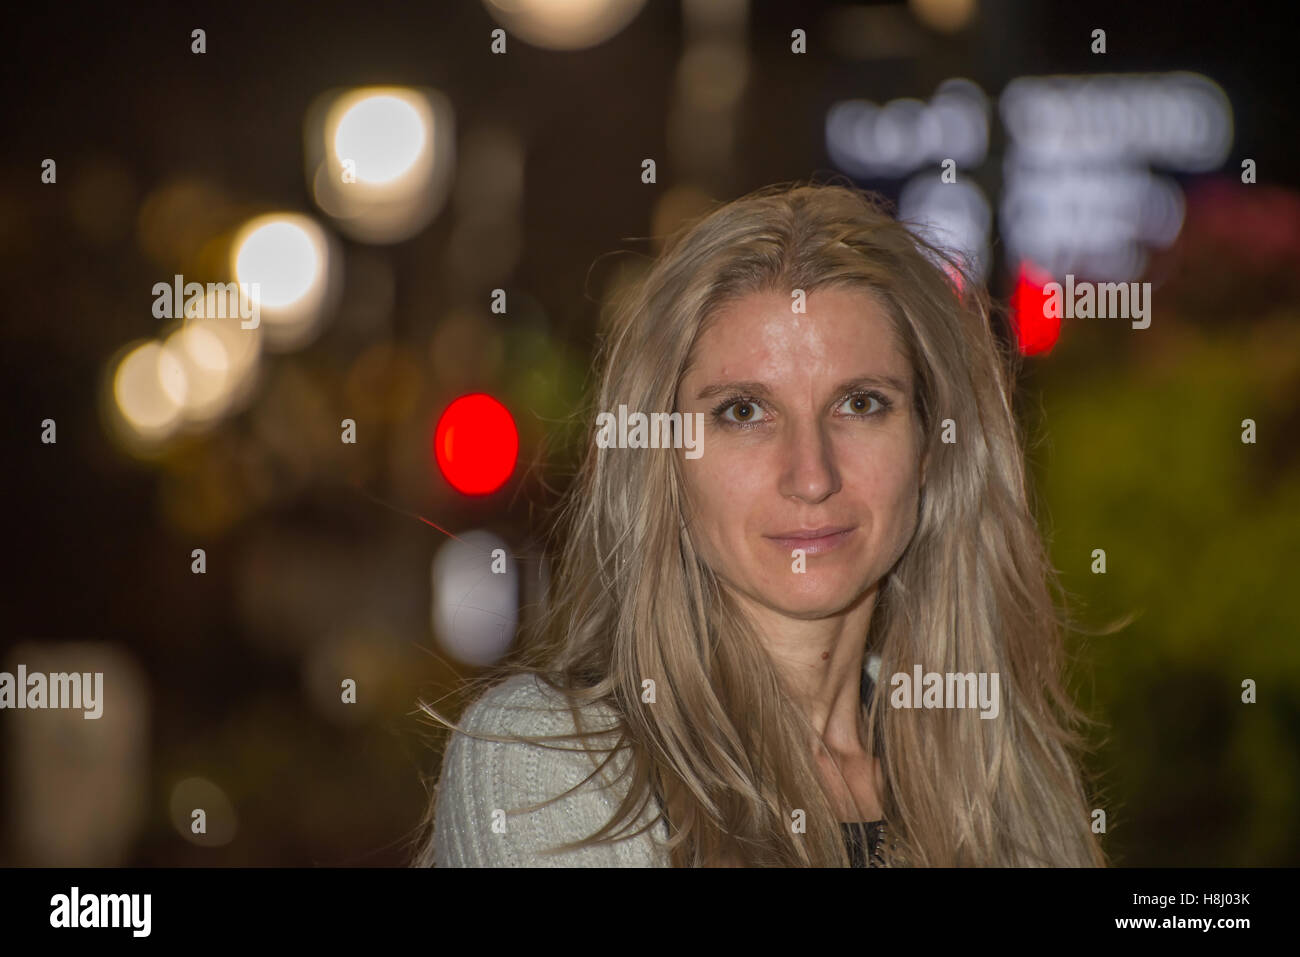 Attractive blonde woman in the city at night with blurred background Stock Photo